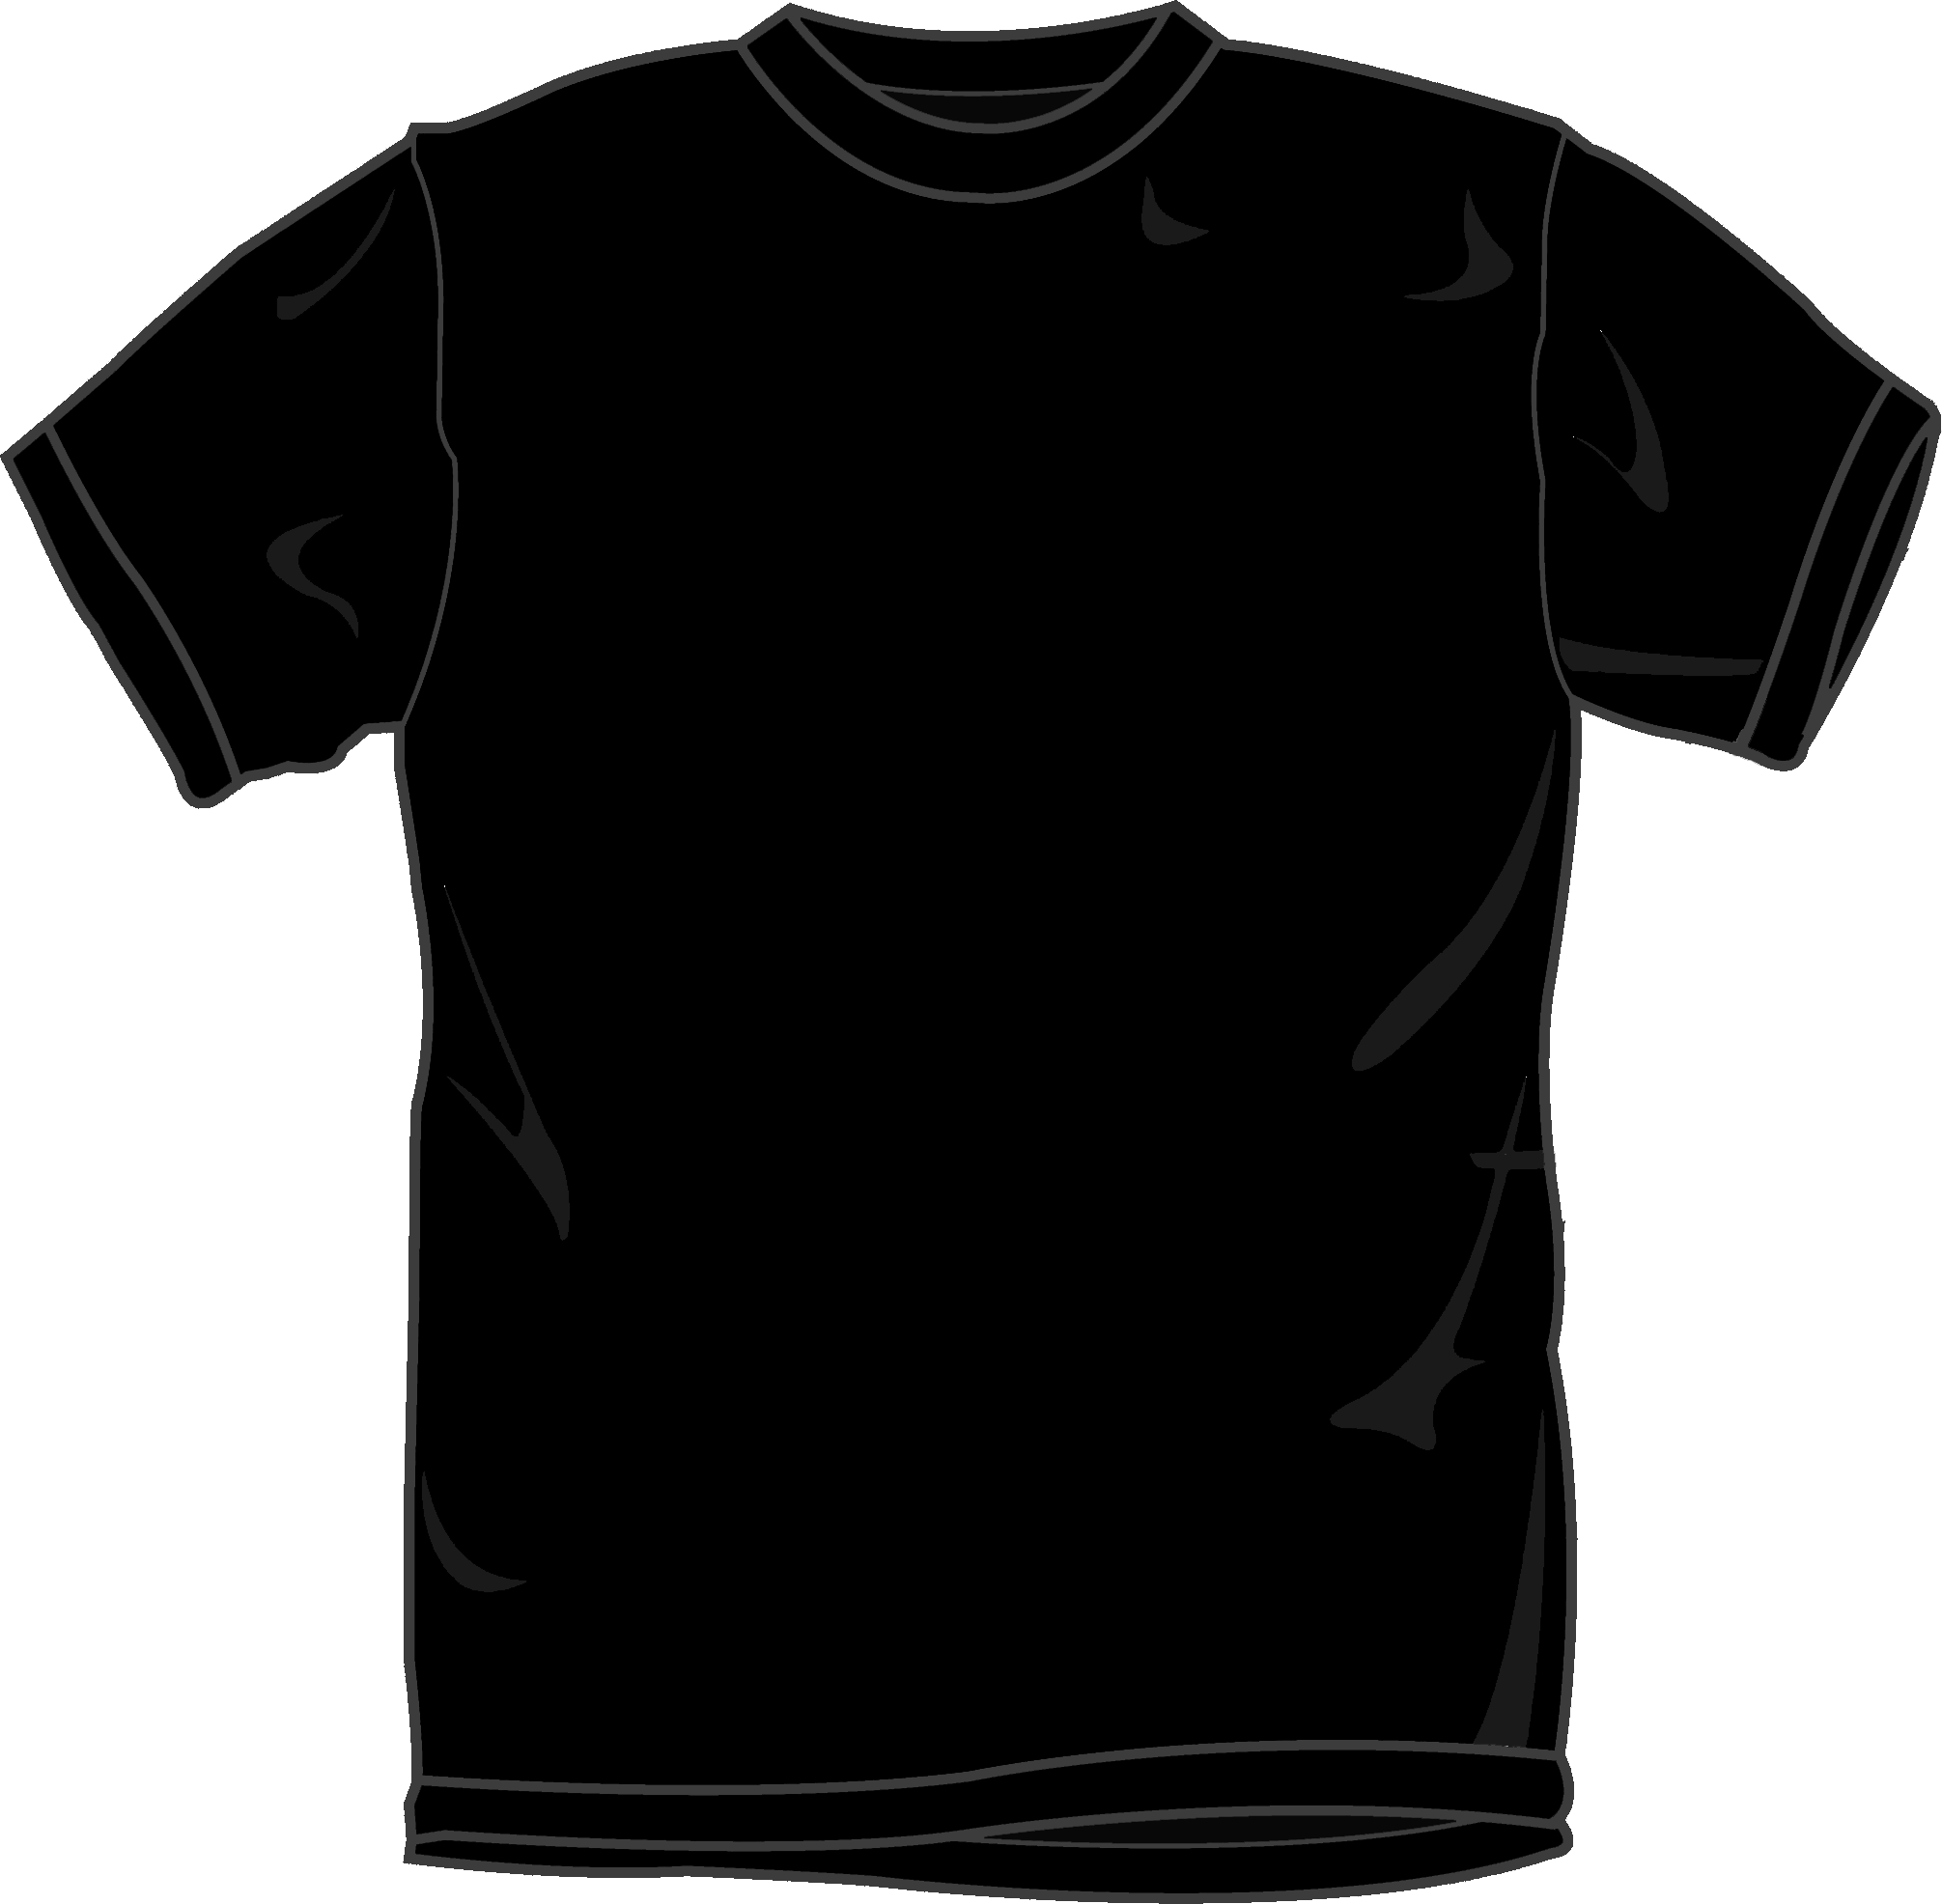 Black Tshirt Template Png / Collection of blank black t shirt png (23 ...